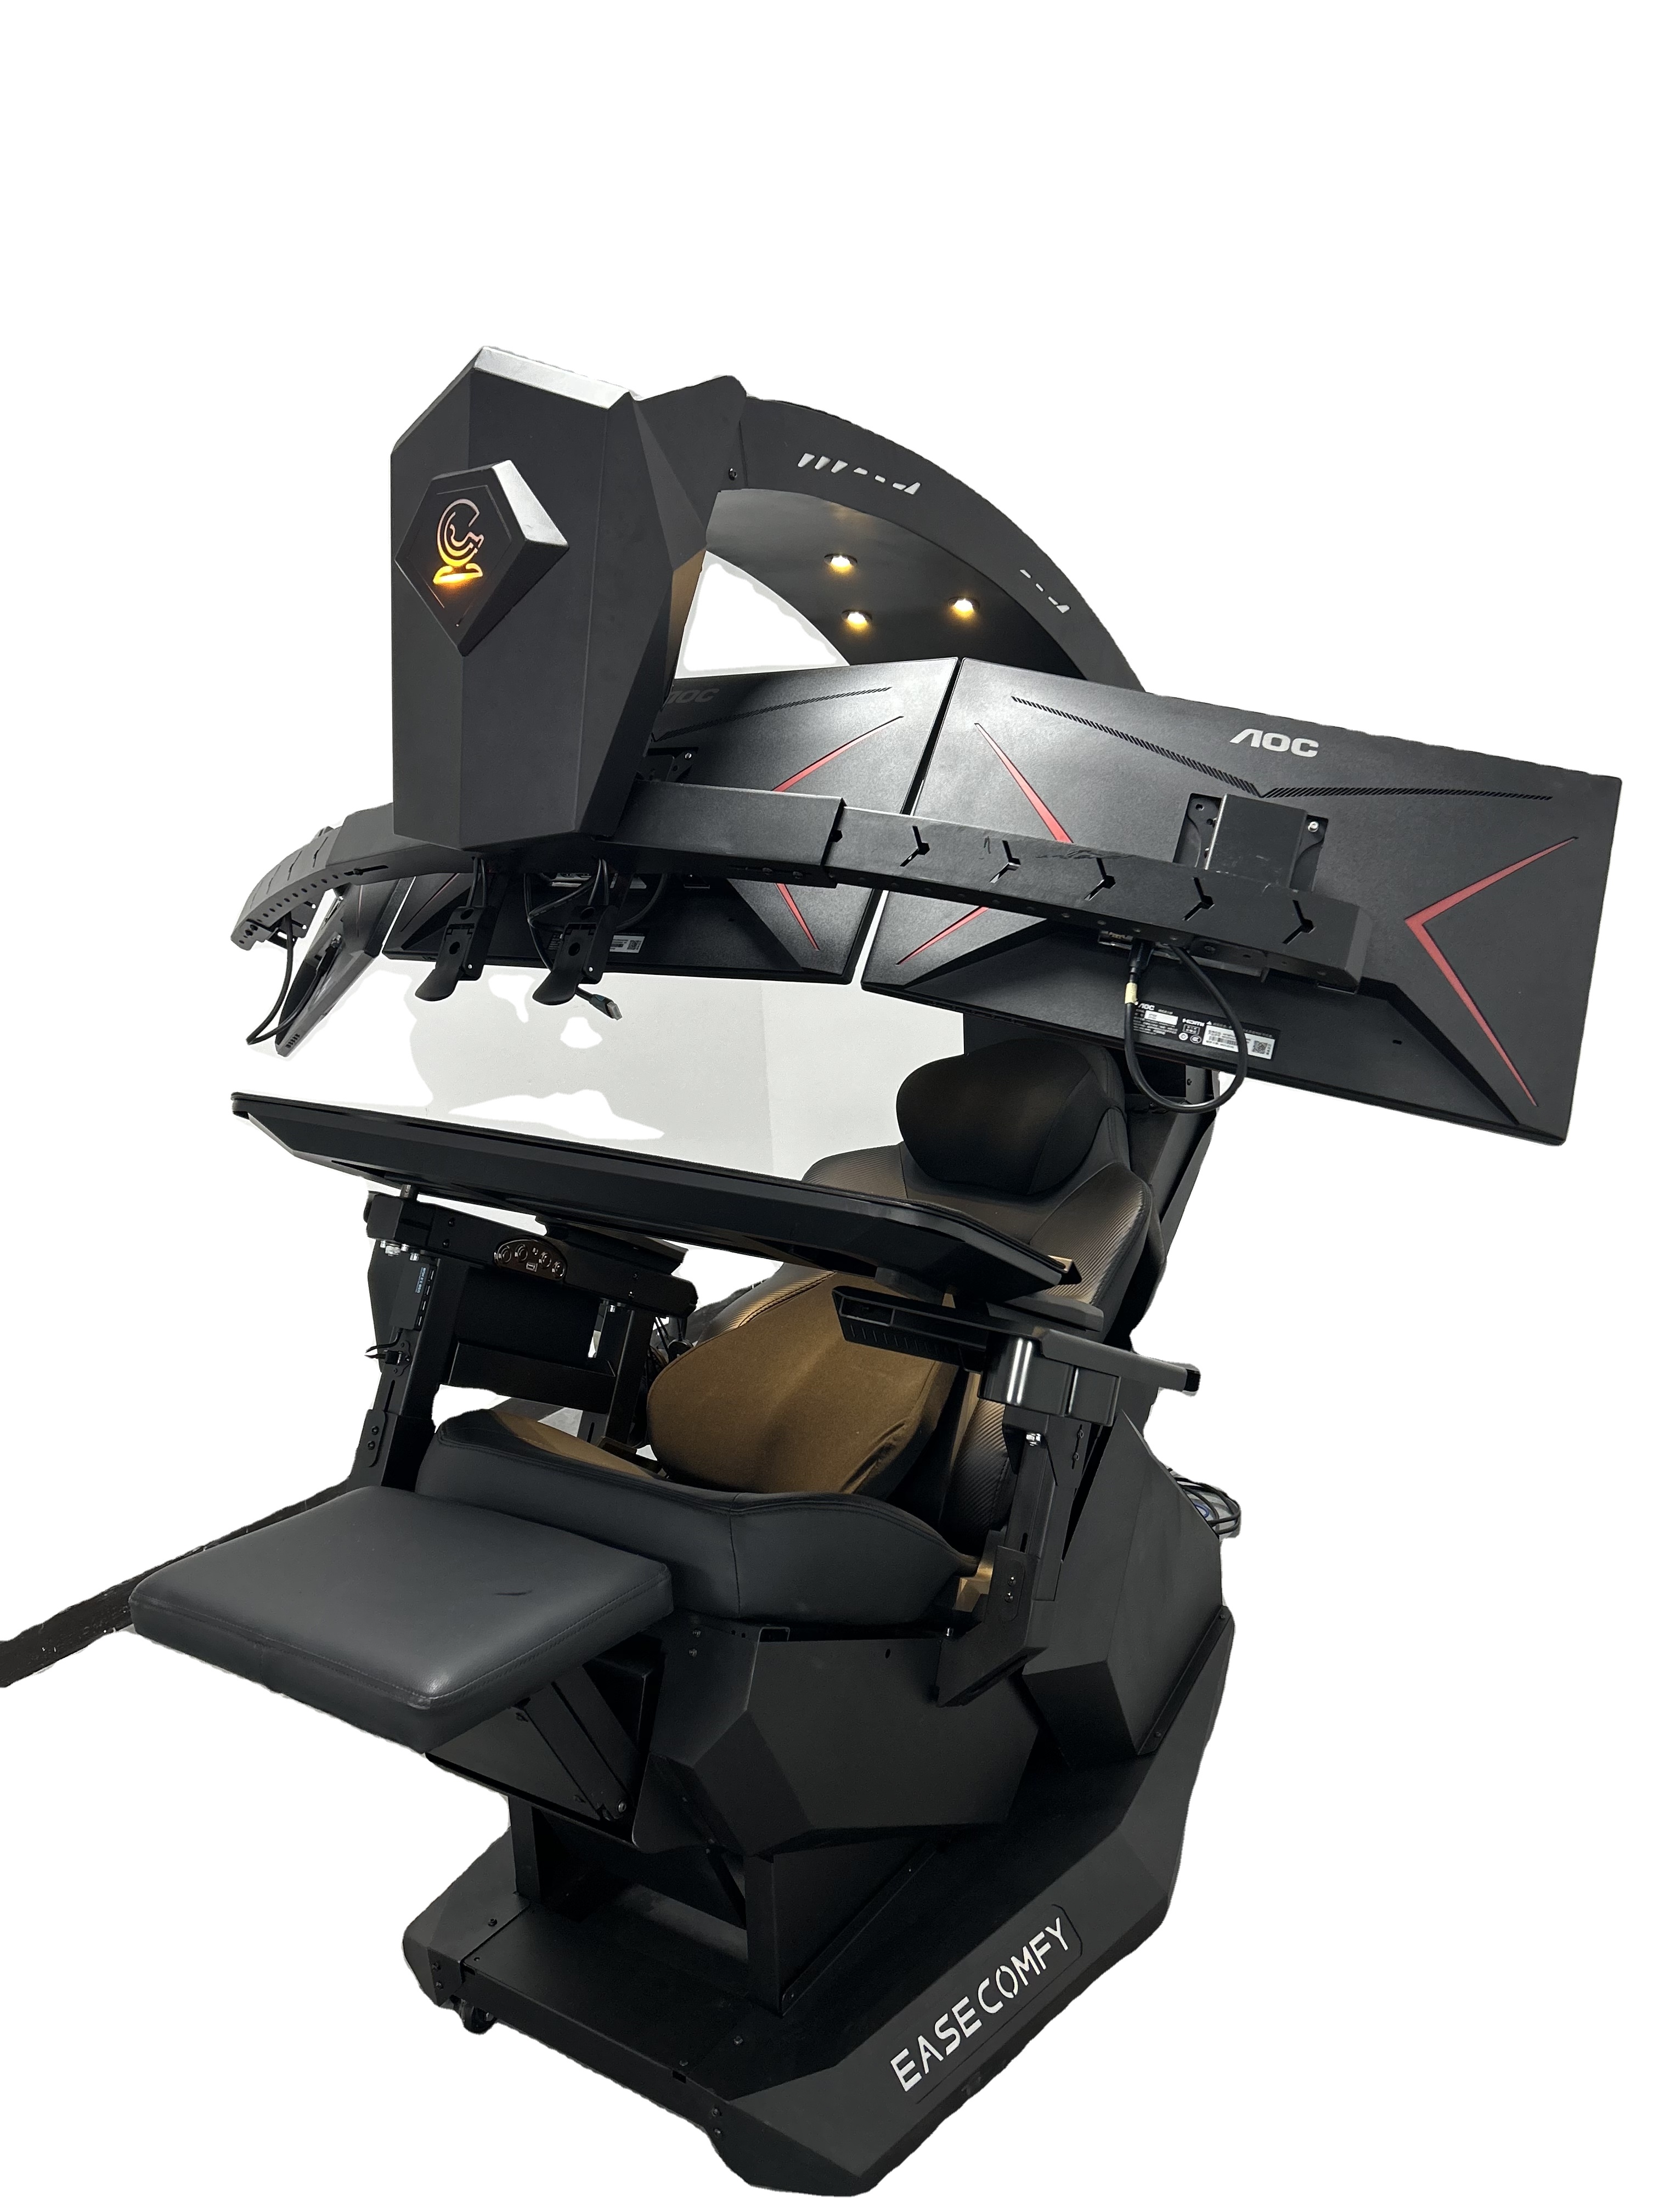 2024 EASE COMFY T2 Throne recline workstation Chair cockpit full functions affordable & adjustable support multi monitors zero gravity chair cockpit